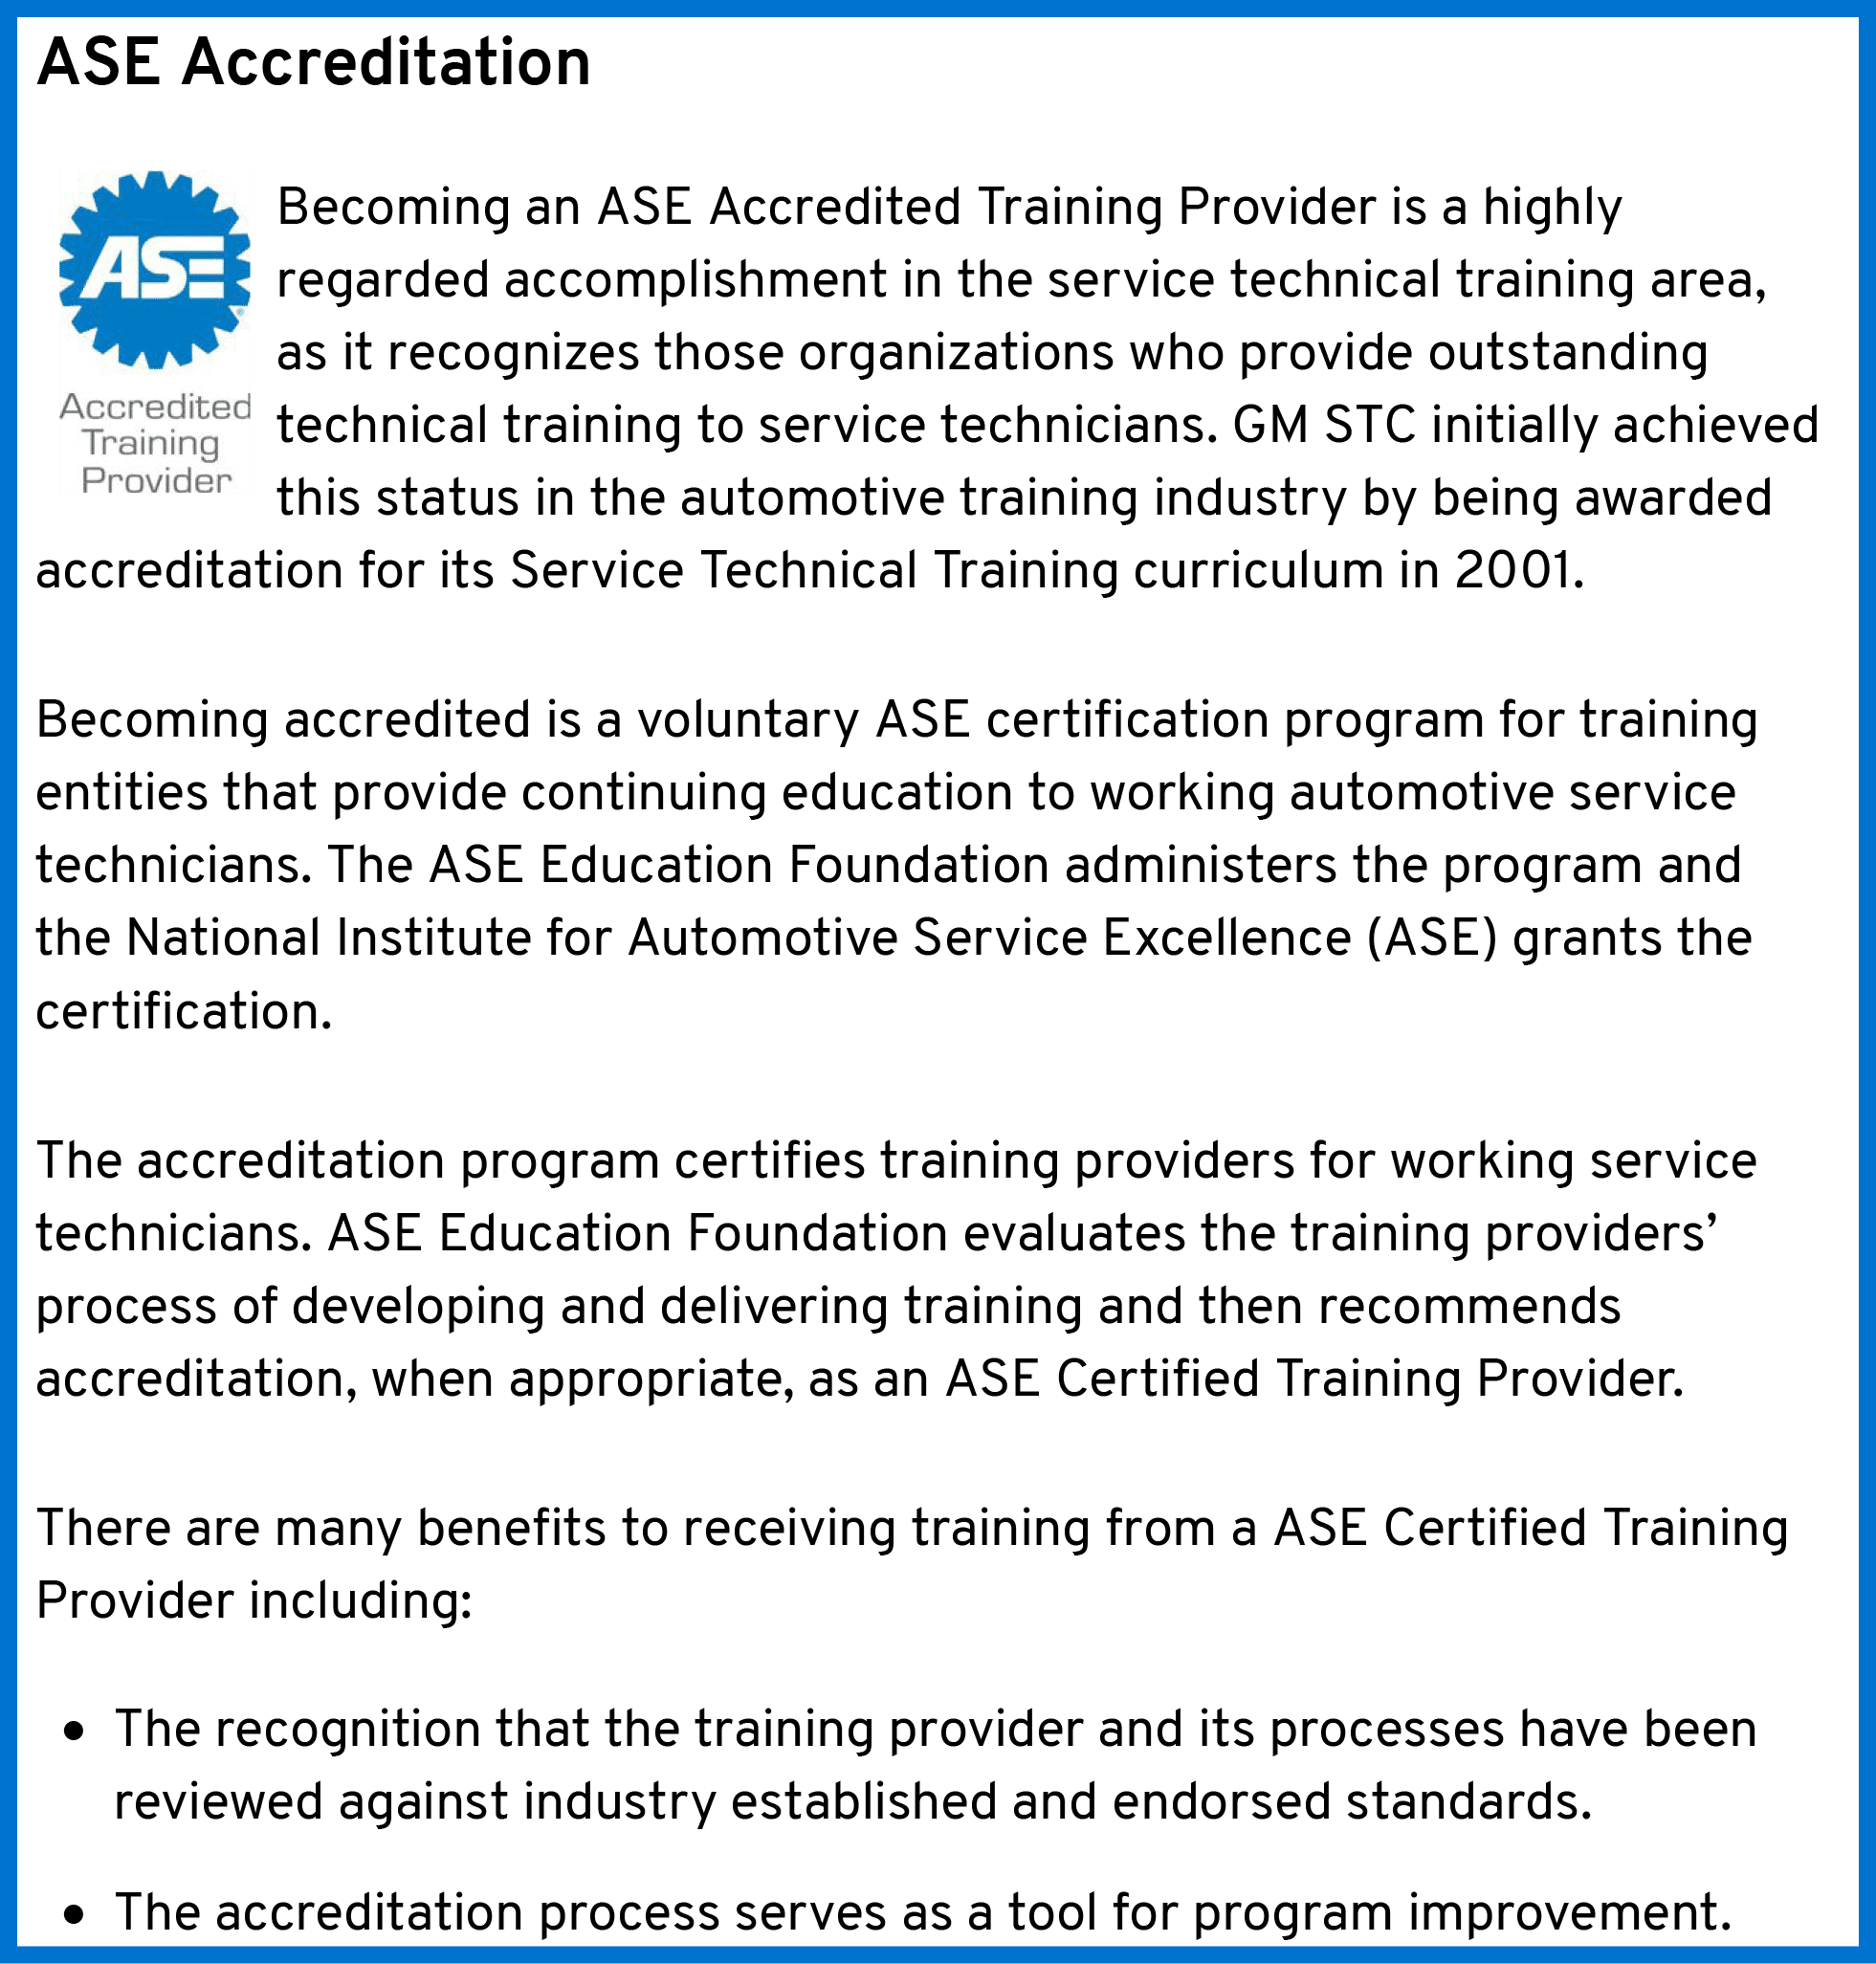 ￼ASE Accreditation B﻿ecoming an ASE Accredited Training Provider is a highly regarded accomplishment in the service t...